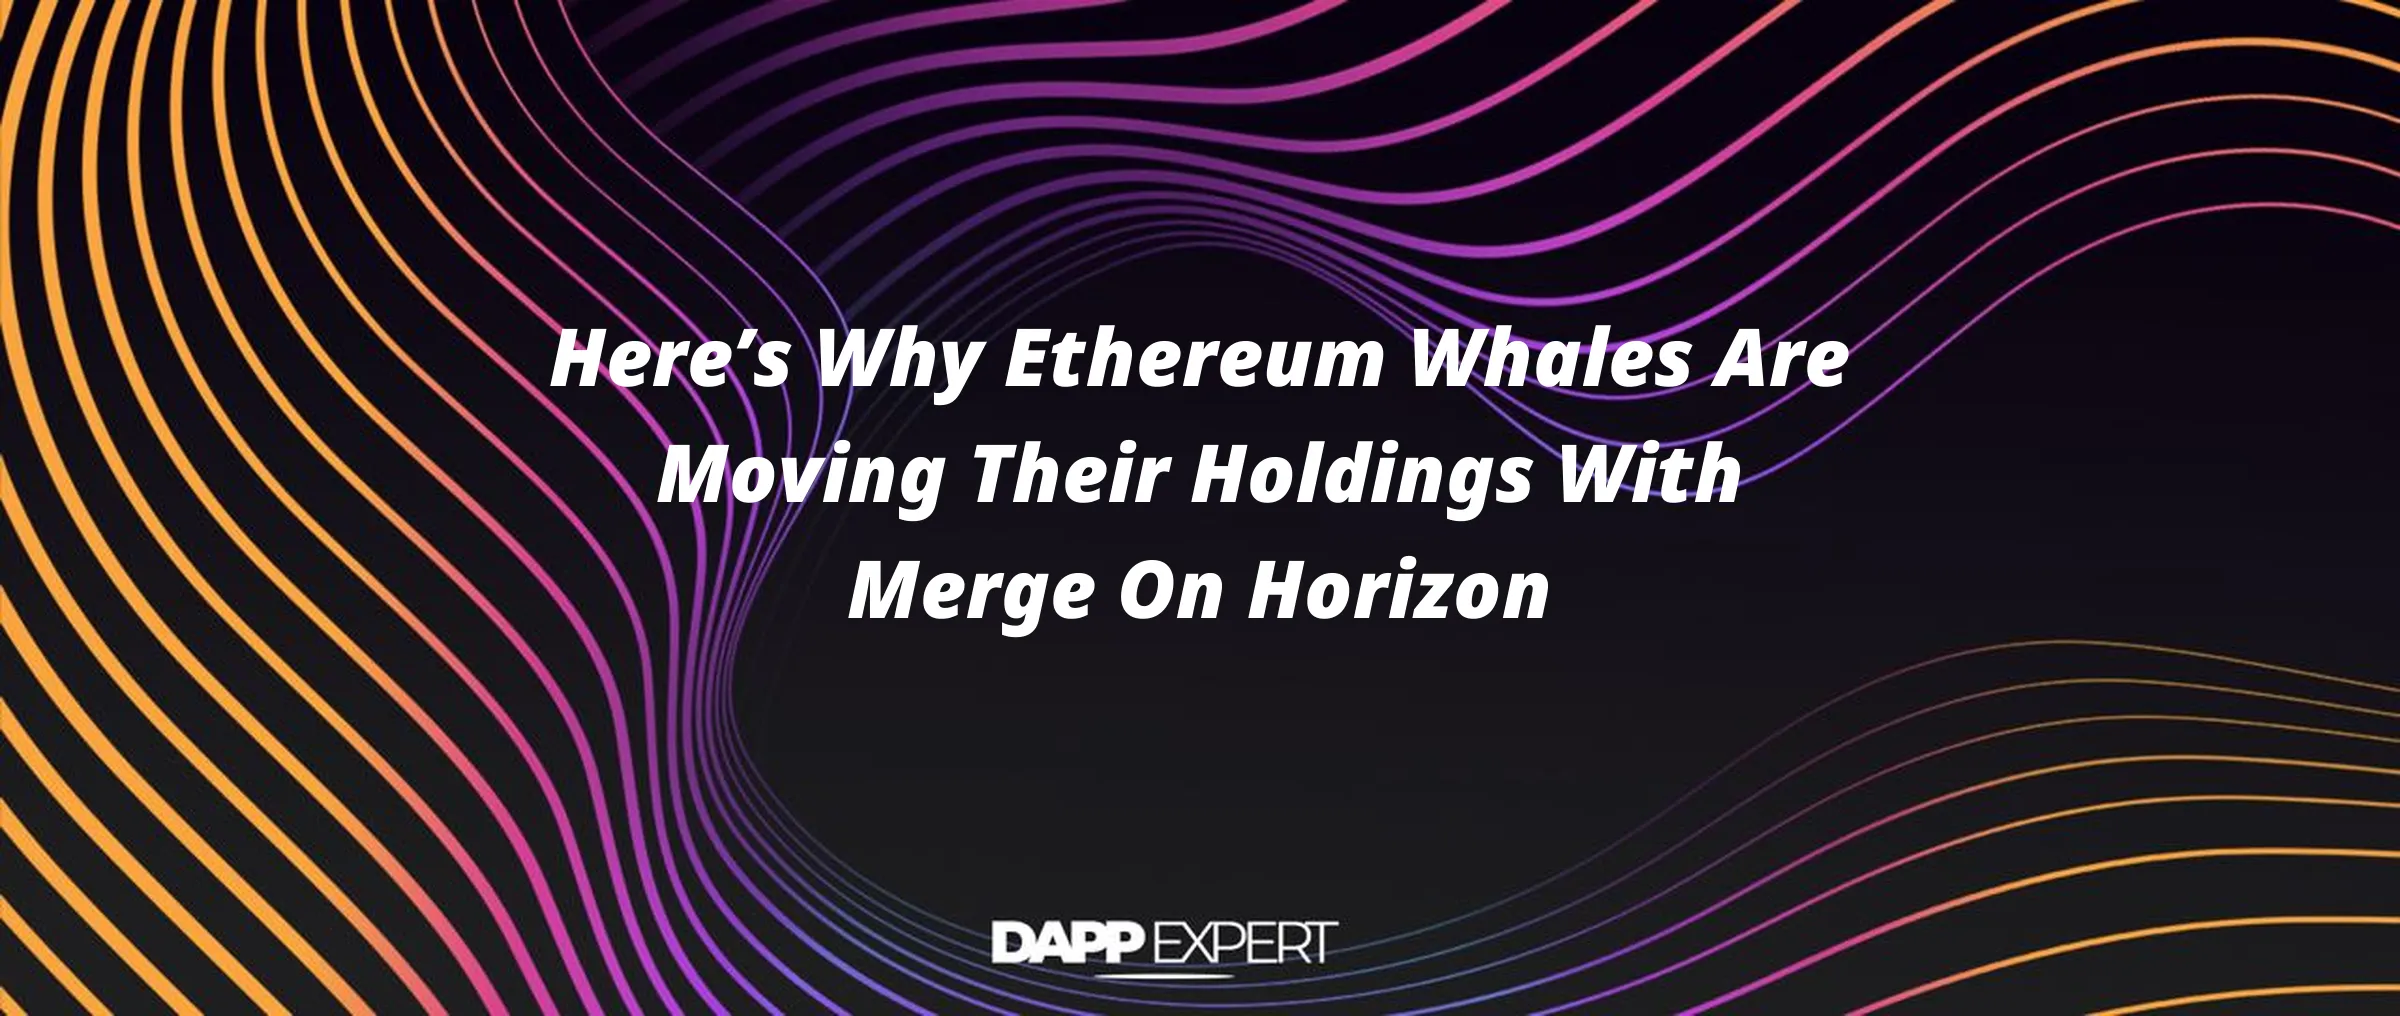 Here’s Why Ethereum Whales Are Moving Their Holdings With Merge On Horizon